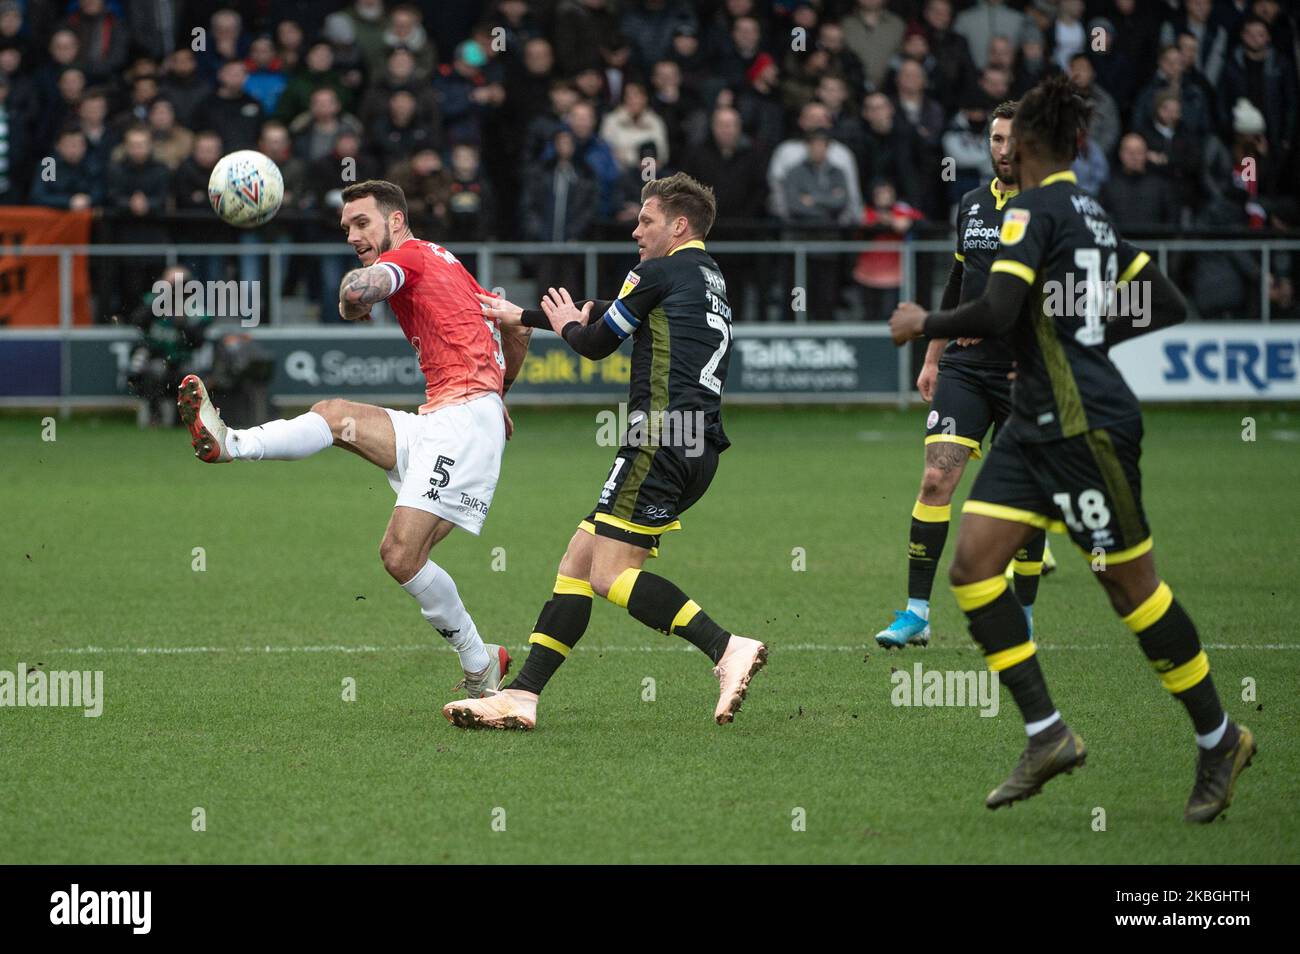 Liam Hogan of Salford City FC clears the ball from Dannie Bulman of Crawley Town FC during the Sky Bet League 2 match between Salford City and Crawley Town at Moor Lane, Salford on Saturday 8th February 2020. (Photo by Ian Charles/MI News/NurPhoto) Stock Photo